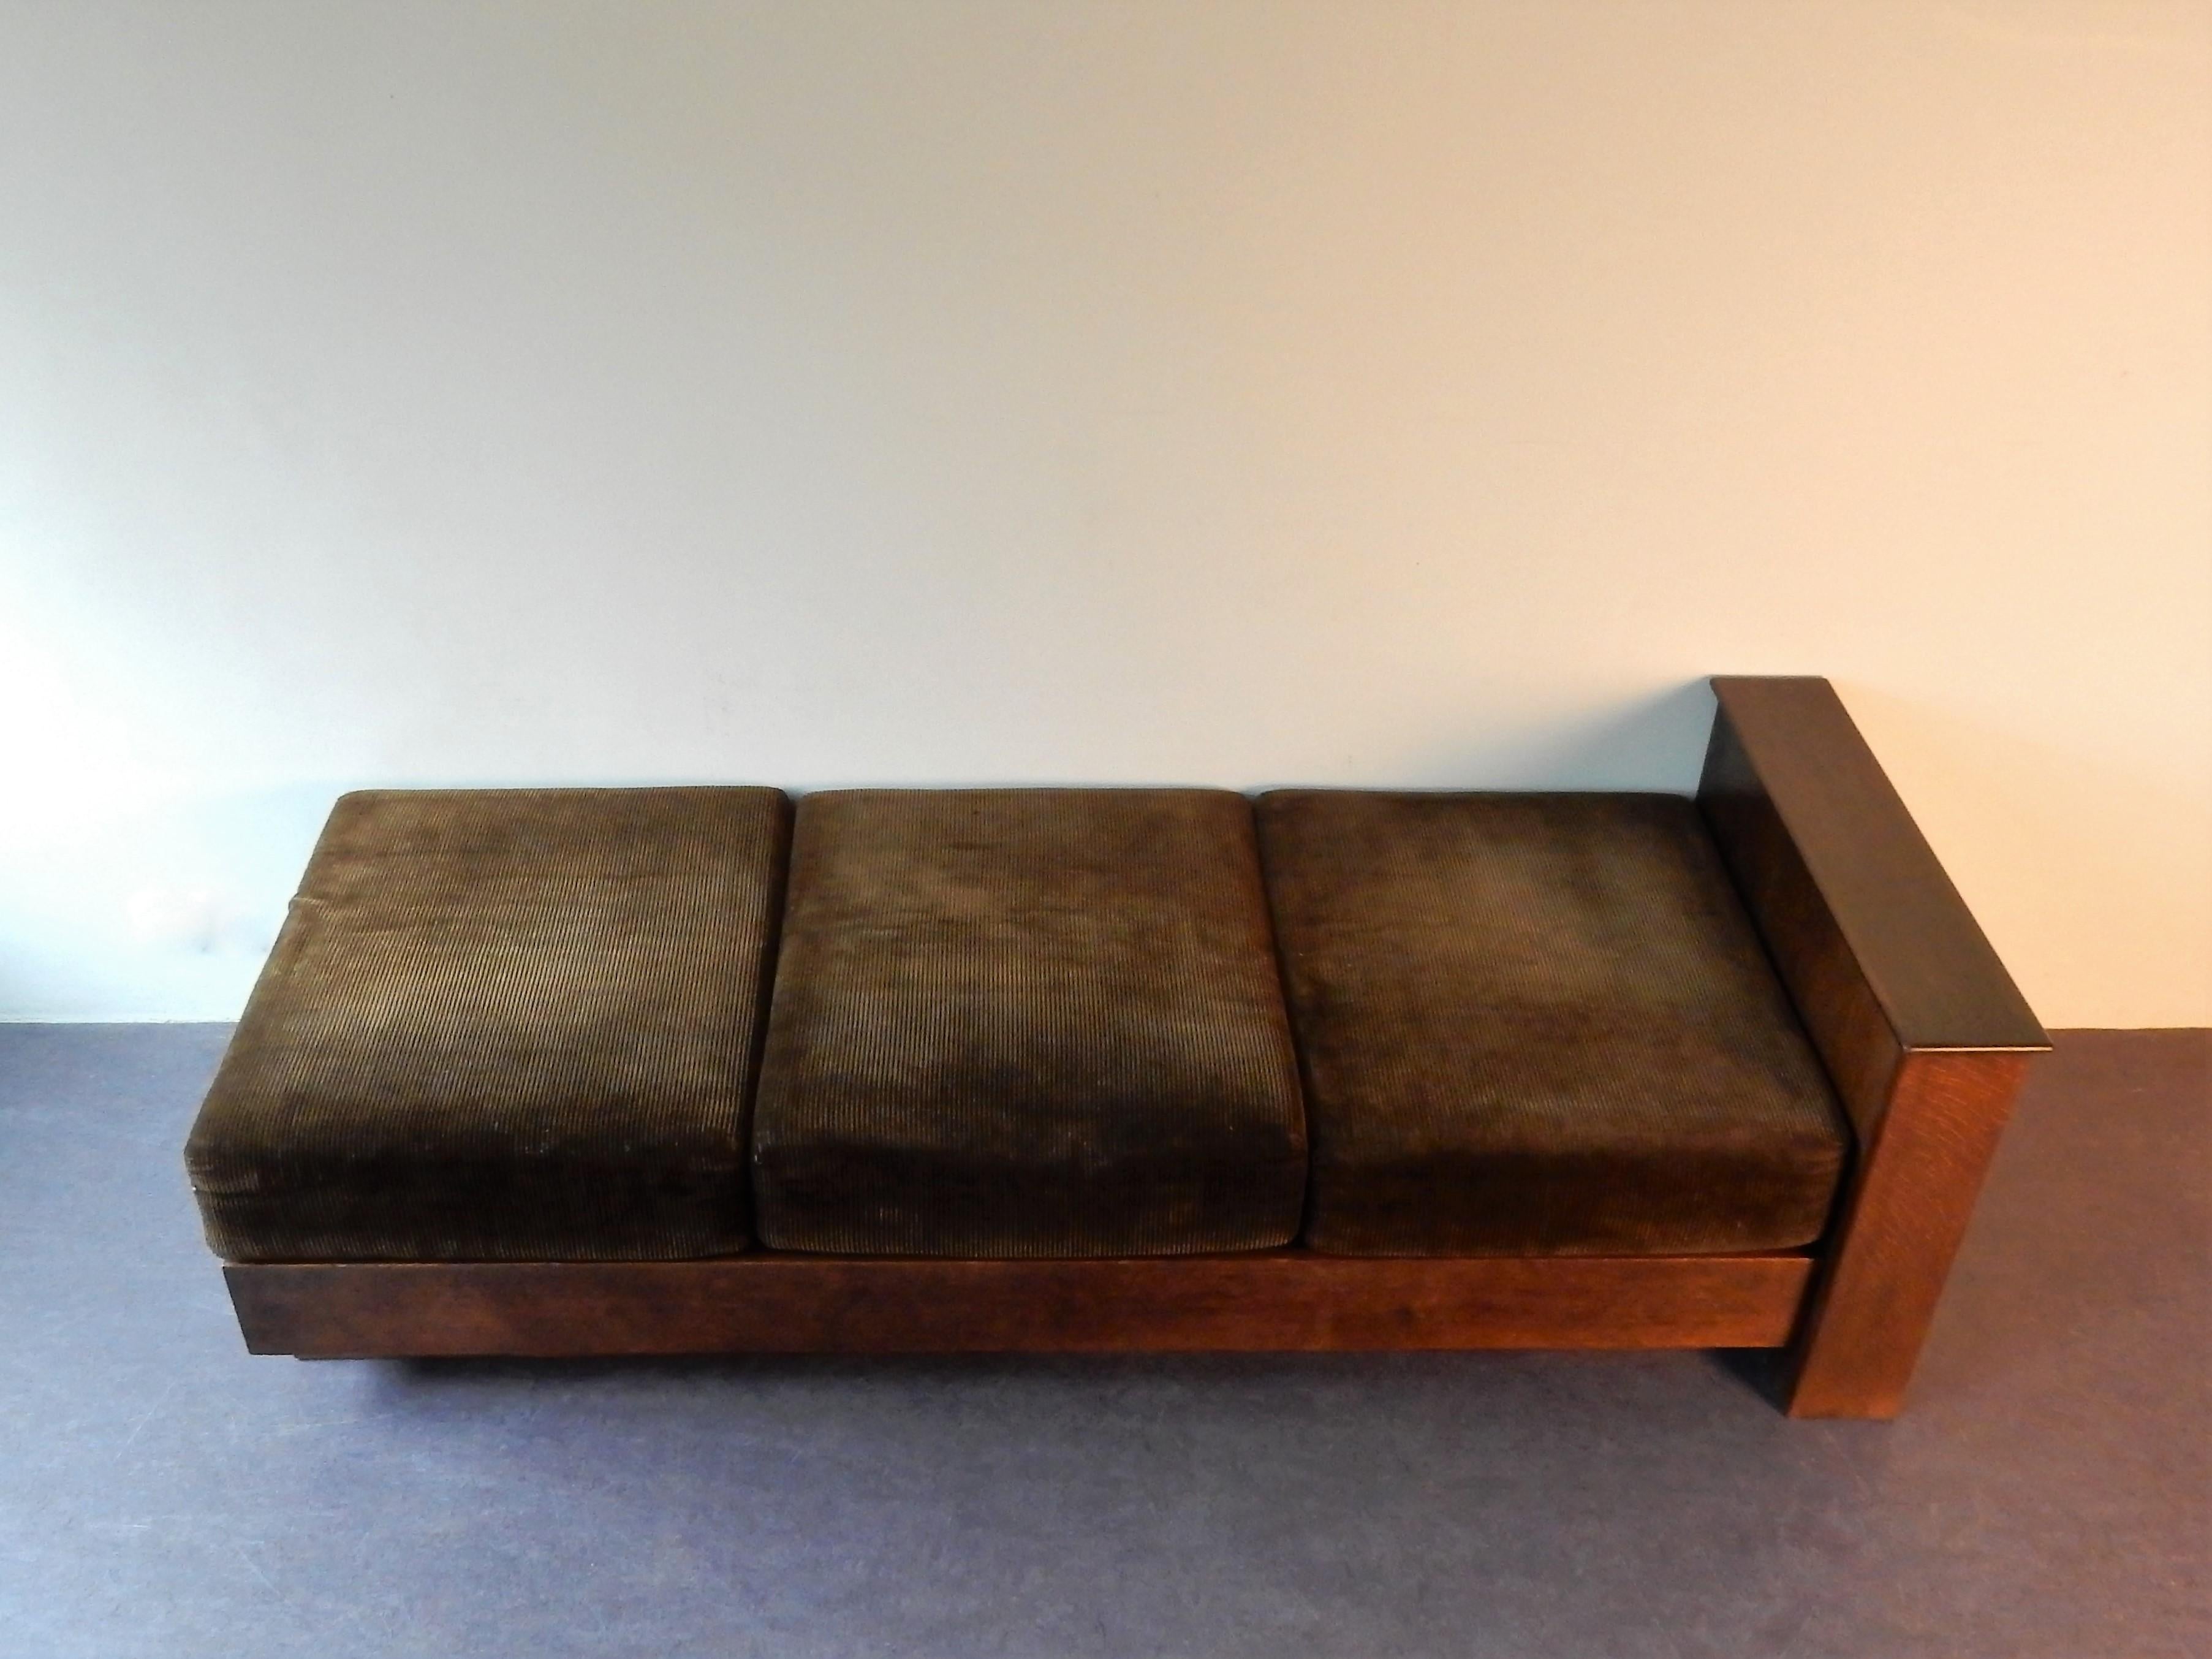 This 1920s daybed was designed for the former and well known Dutch furniture factory L.O.V Oosterbeek. L.O.V. is an abbreviation of Labor Omnia Vincit, which means 